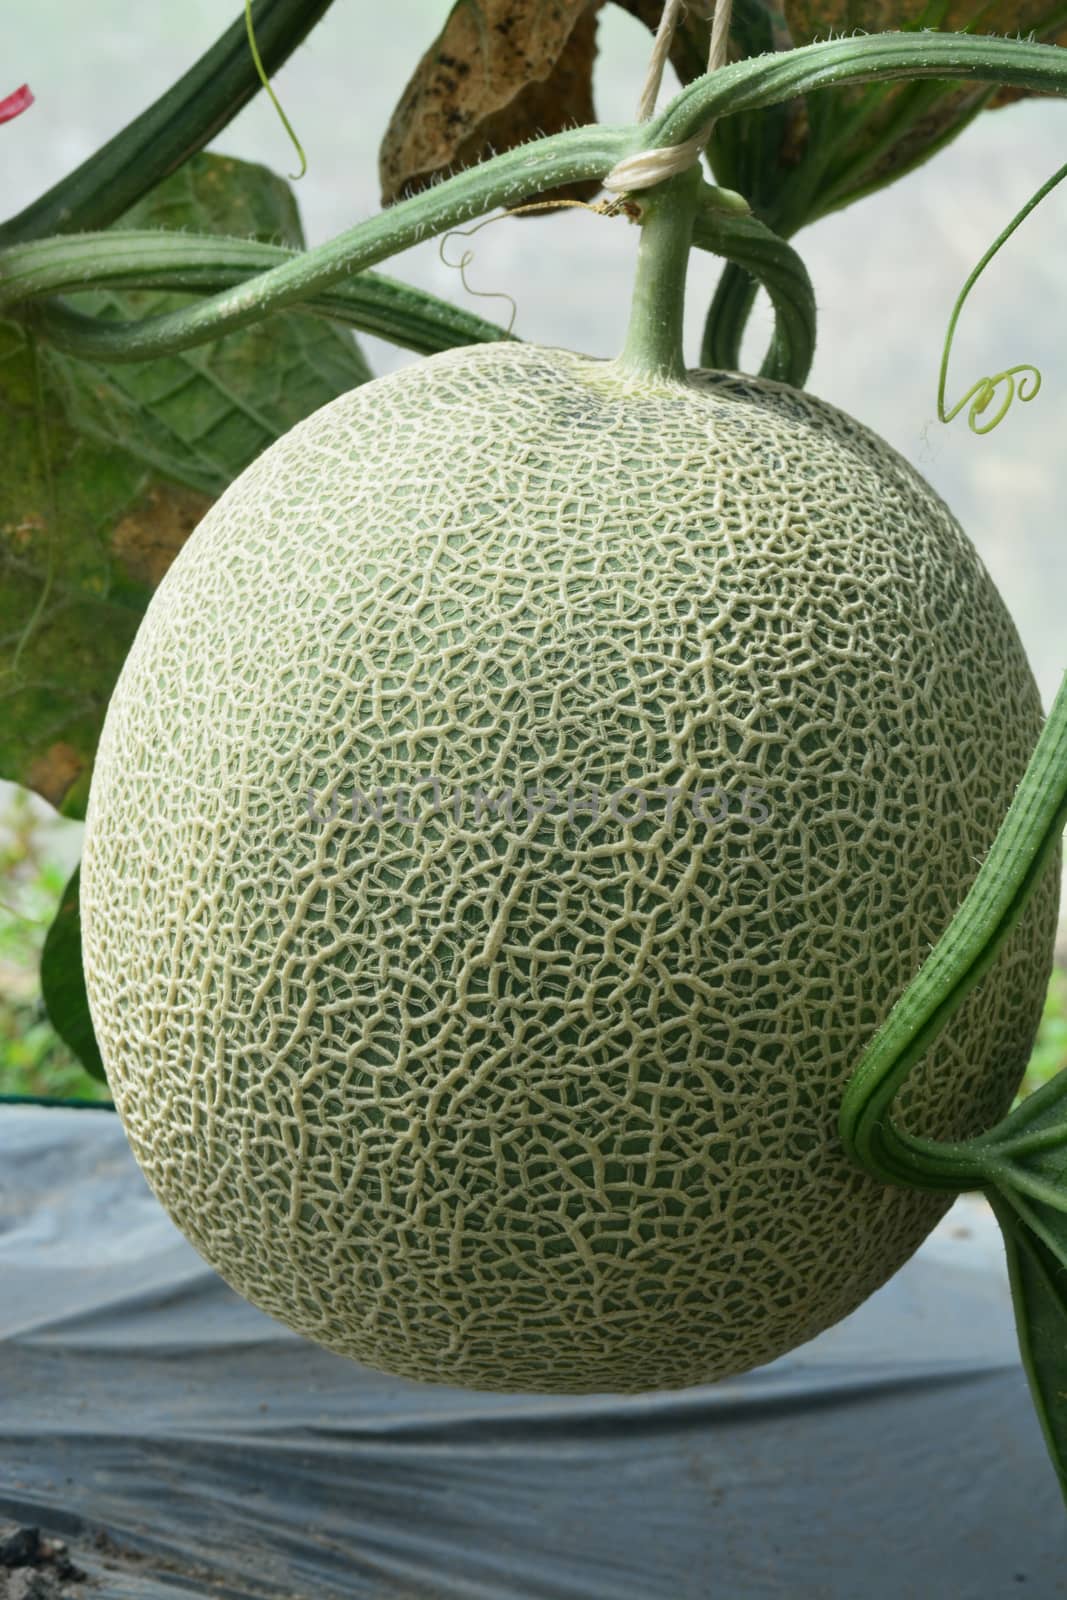 Cantaloupe. Fresh melon on tree. ** note select focus with shallow depth of field

